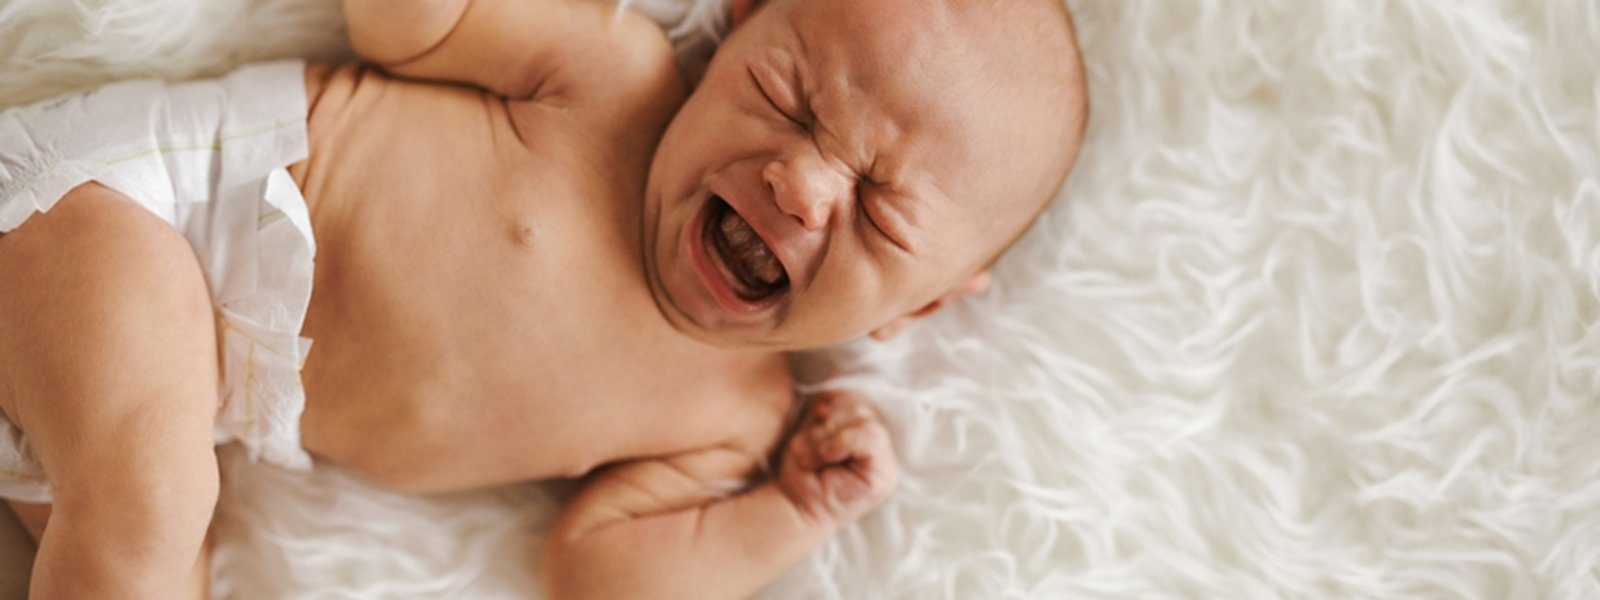 Your Baby's Breastfeeding Cues